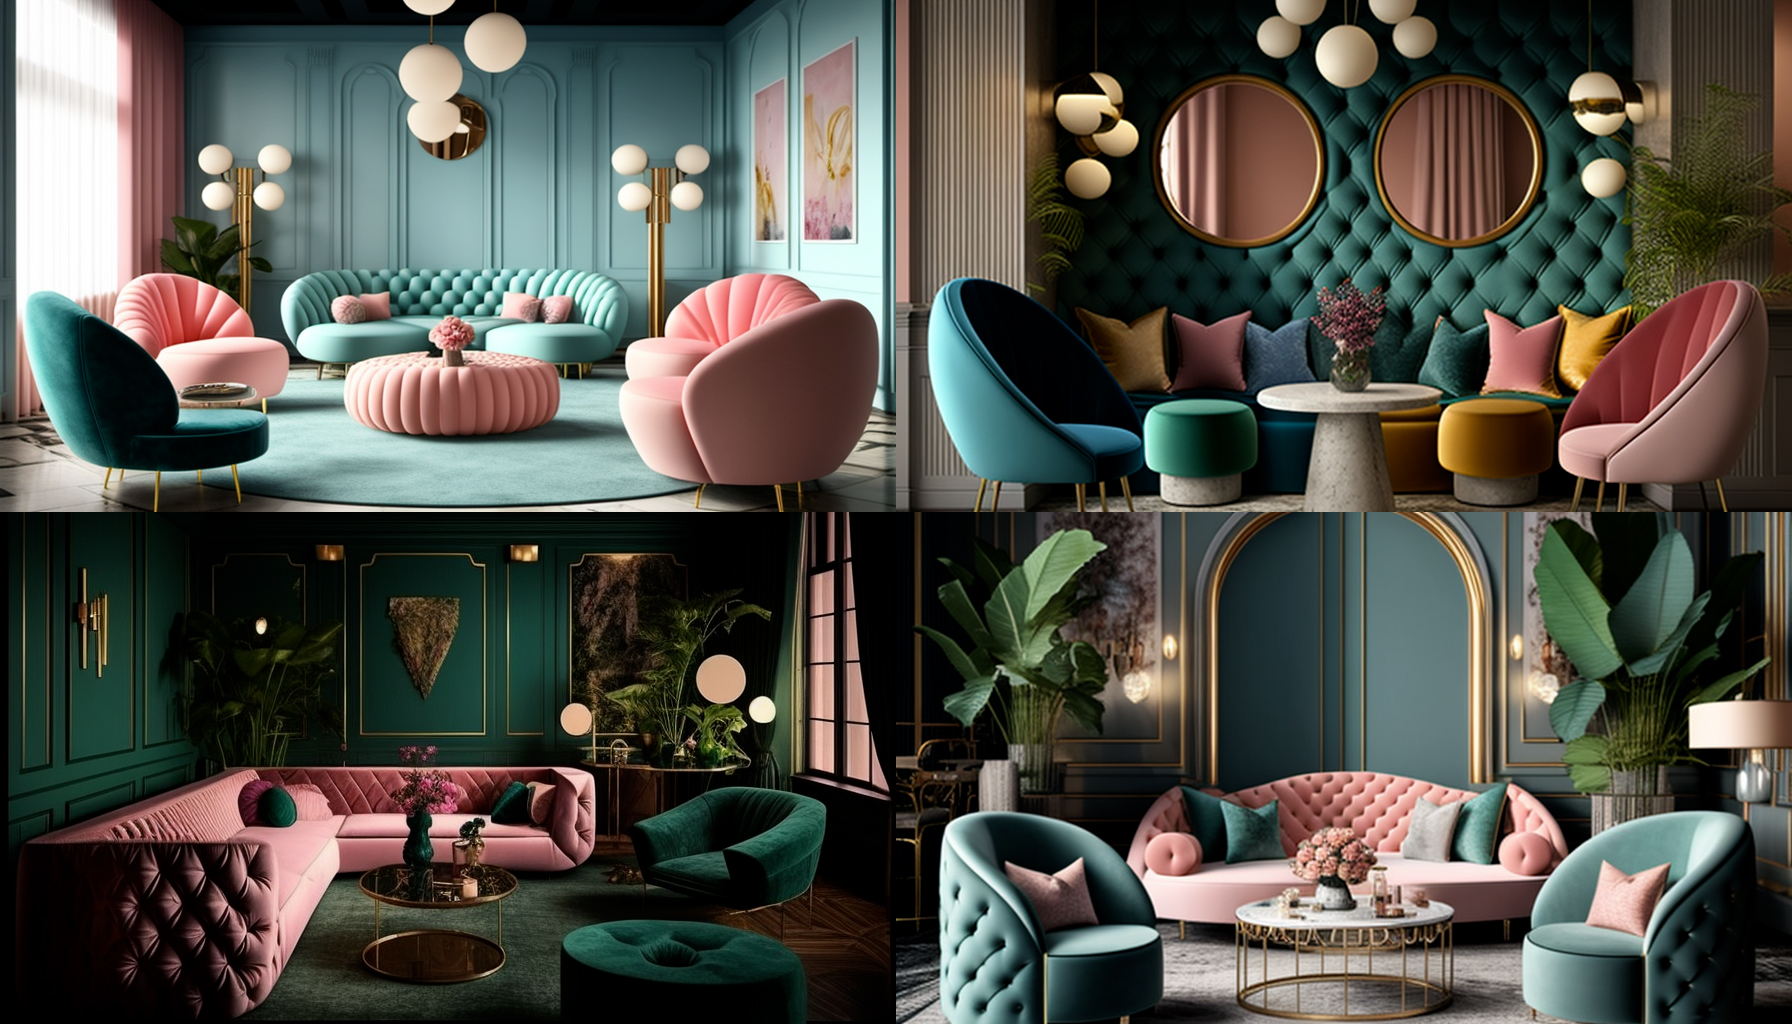 PaintRight - Interior Design Trends - Instagrammable Lounge | Interior ...